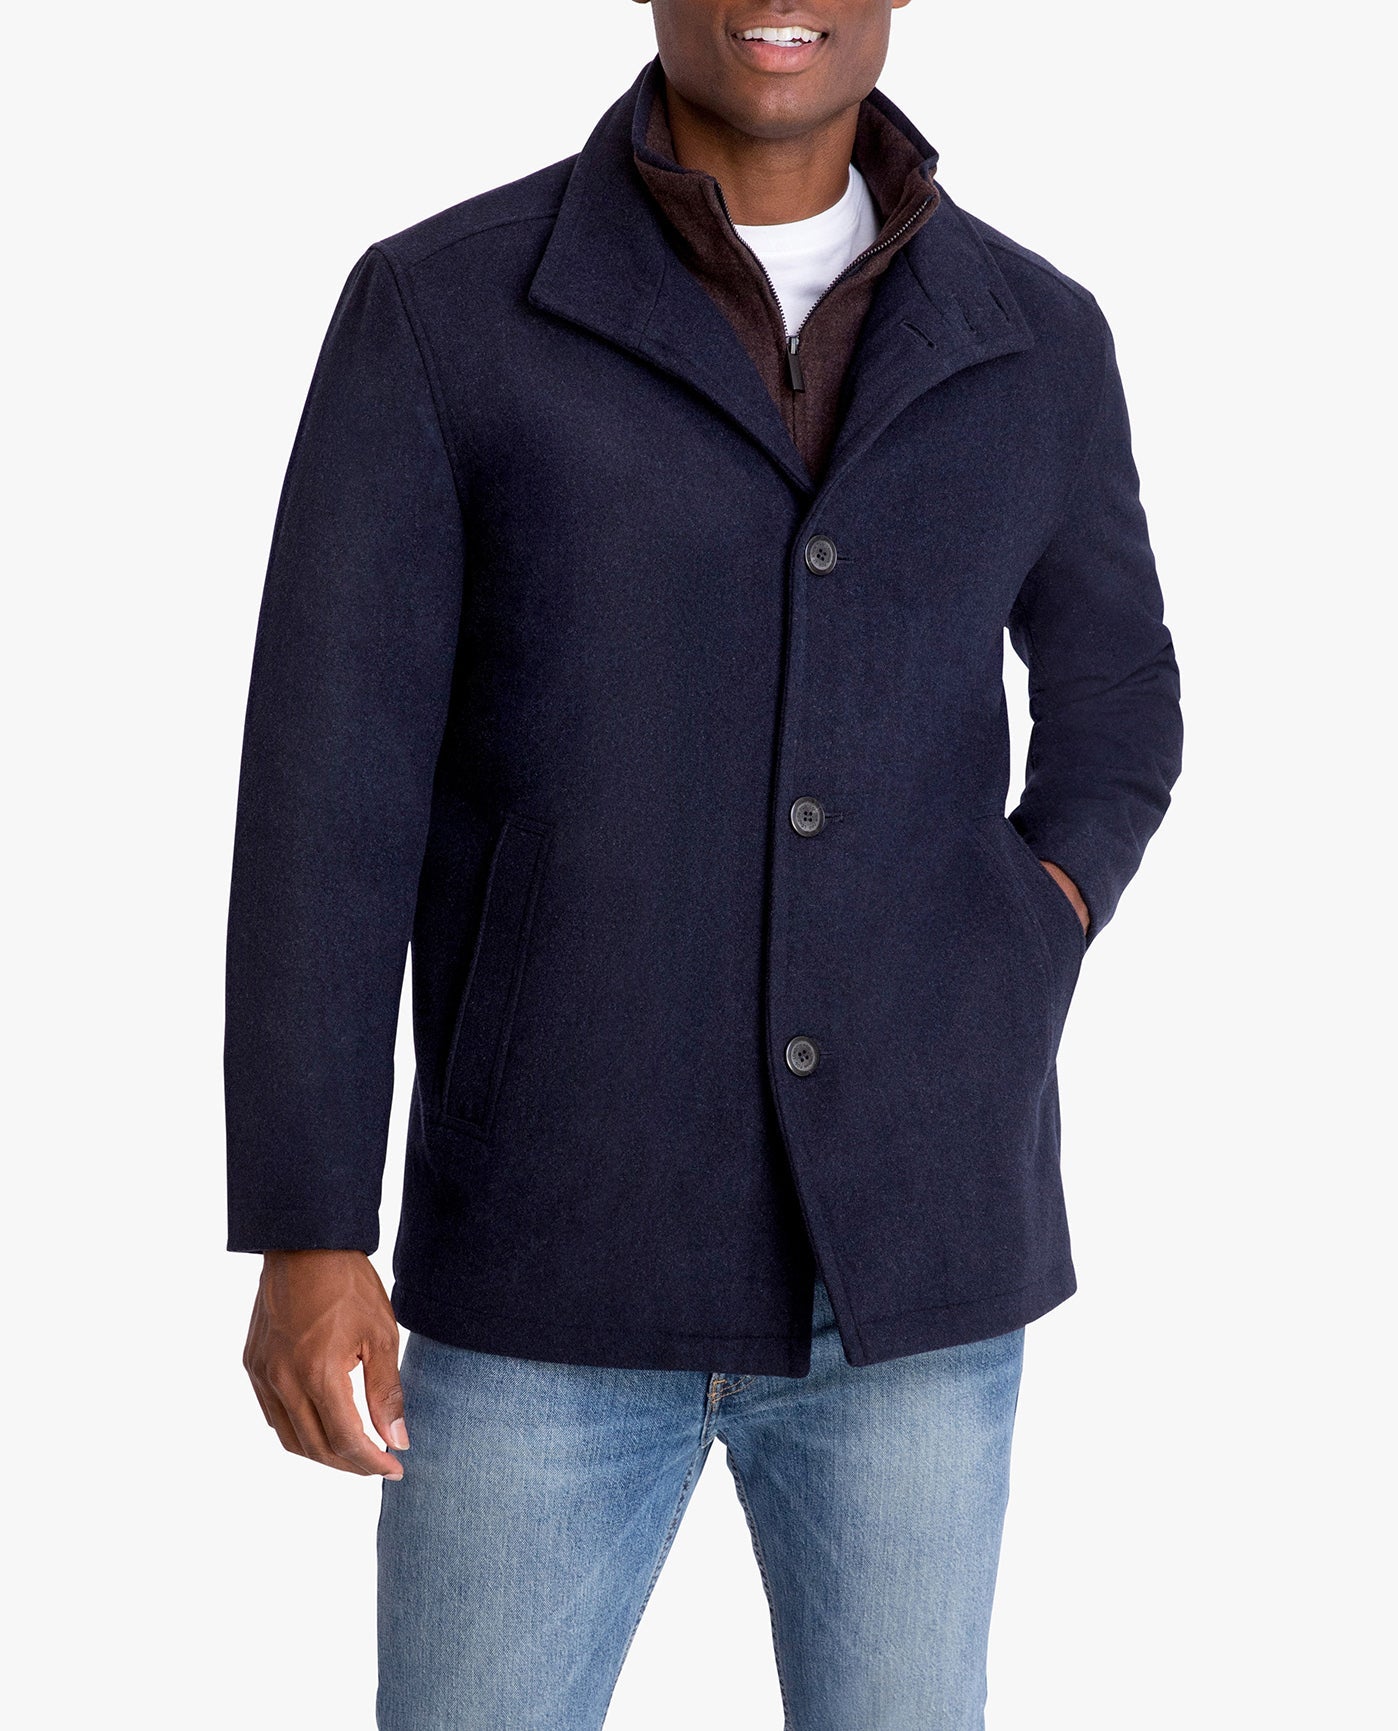 DETAIL VIEW OF AMHERST BUTTON FRONT WOOL JACKET | NAVY HEATHER